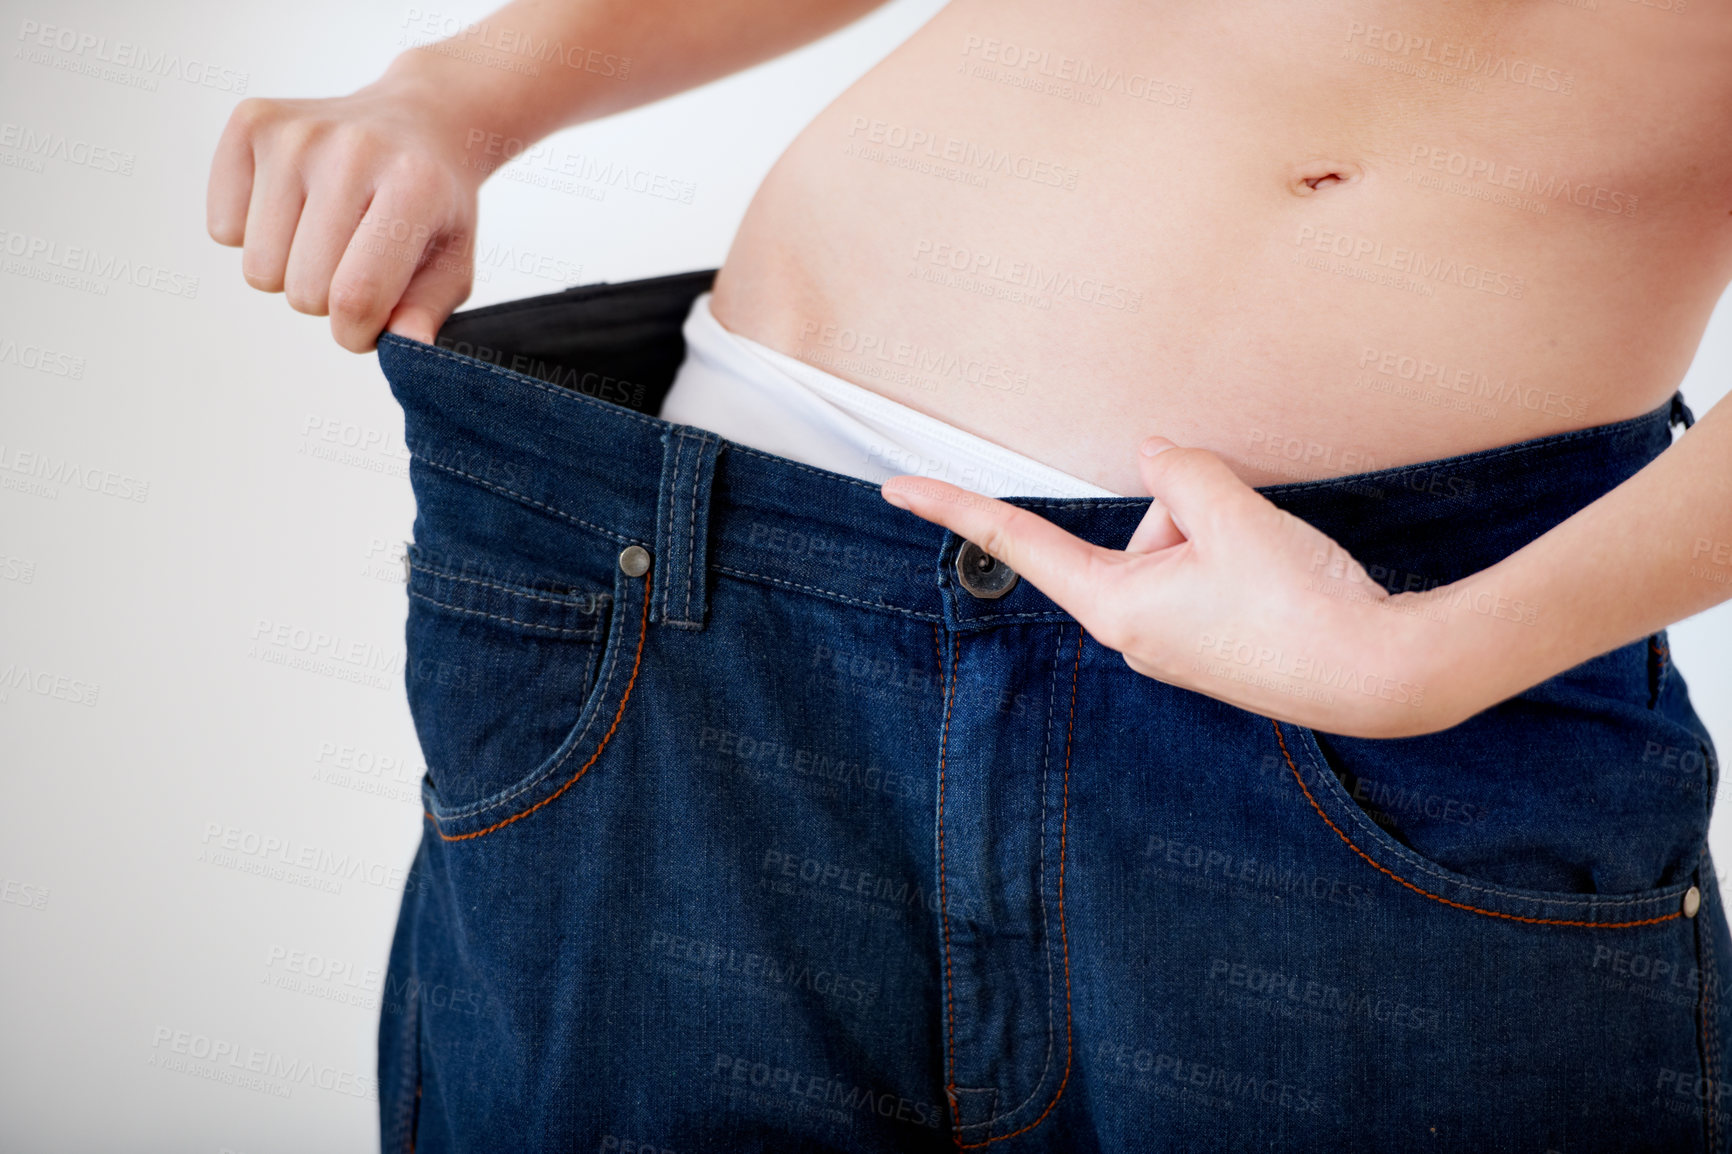 Buy stock photo Cropped image of a woman pulling the waistband of her pants - Weight Loss